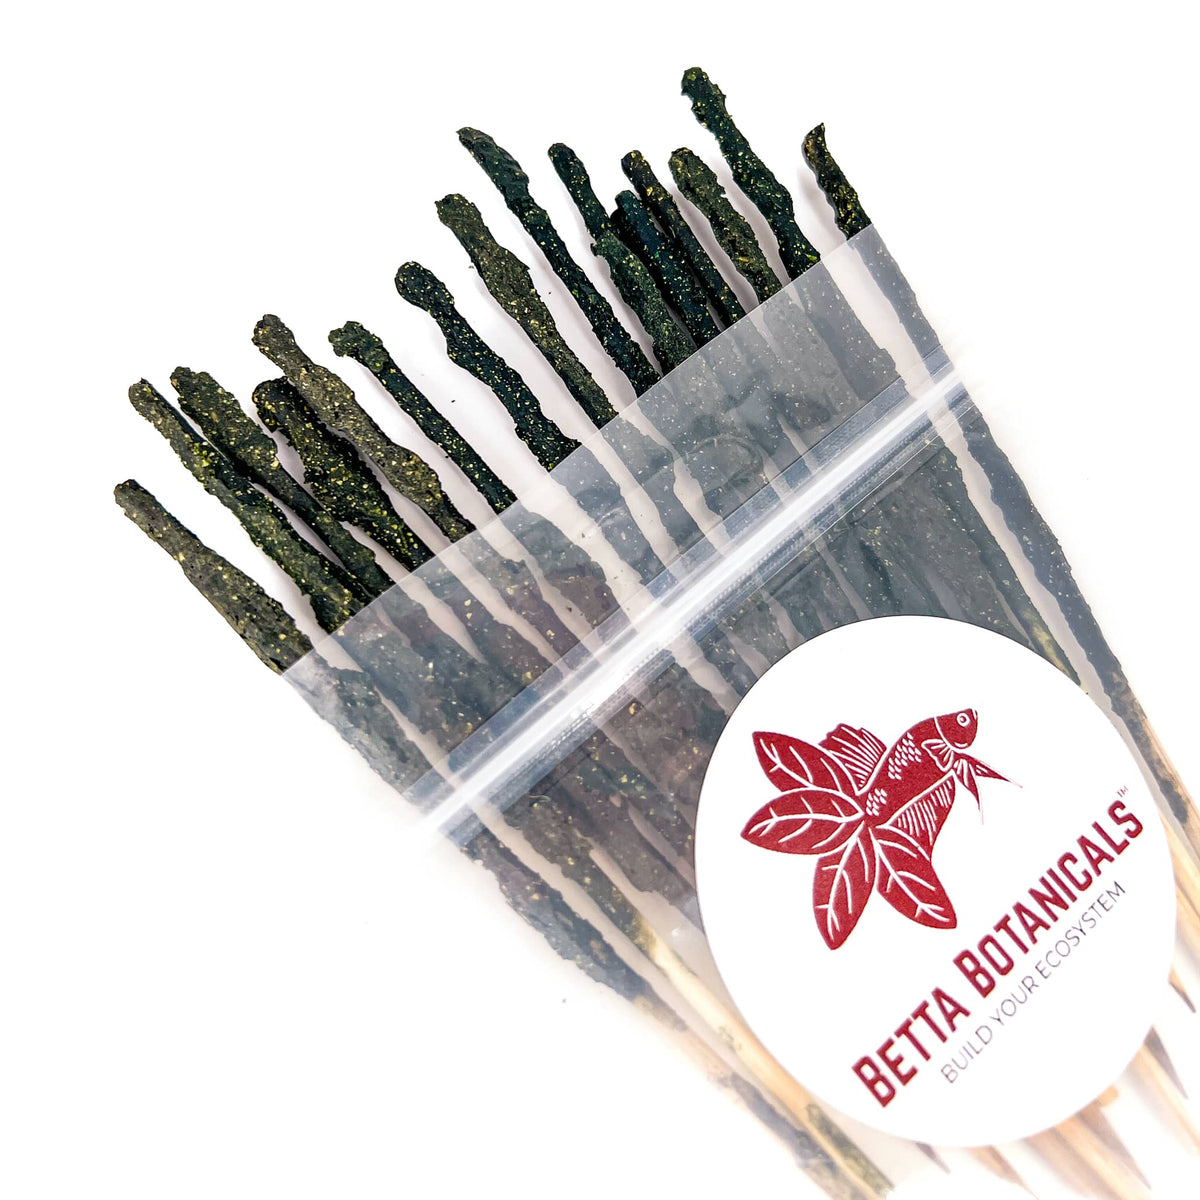 Pile of wooden skewers with green miyagi's shrimp food mix on them for aquarium shrimp in clear sustainable packaging by Betta Botanicals.